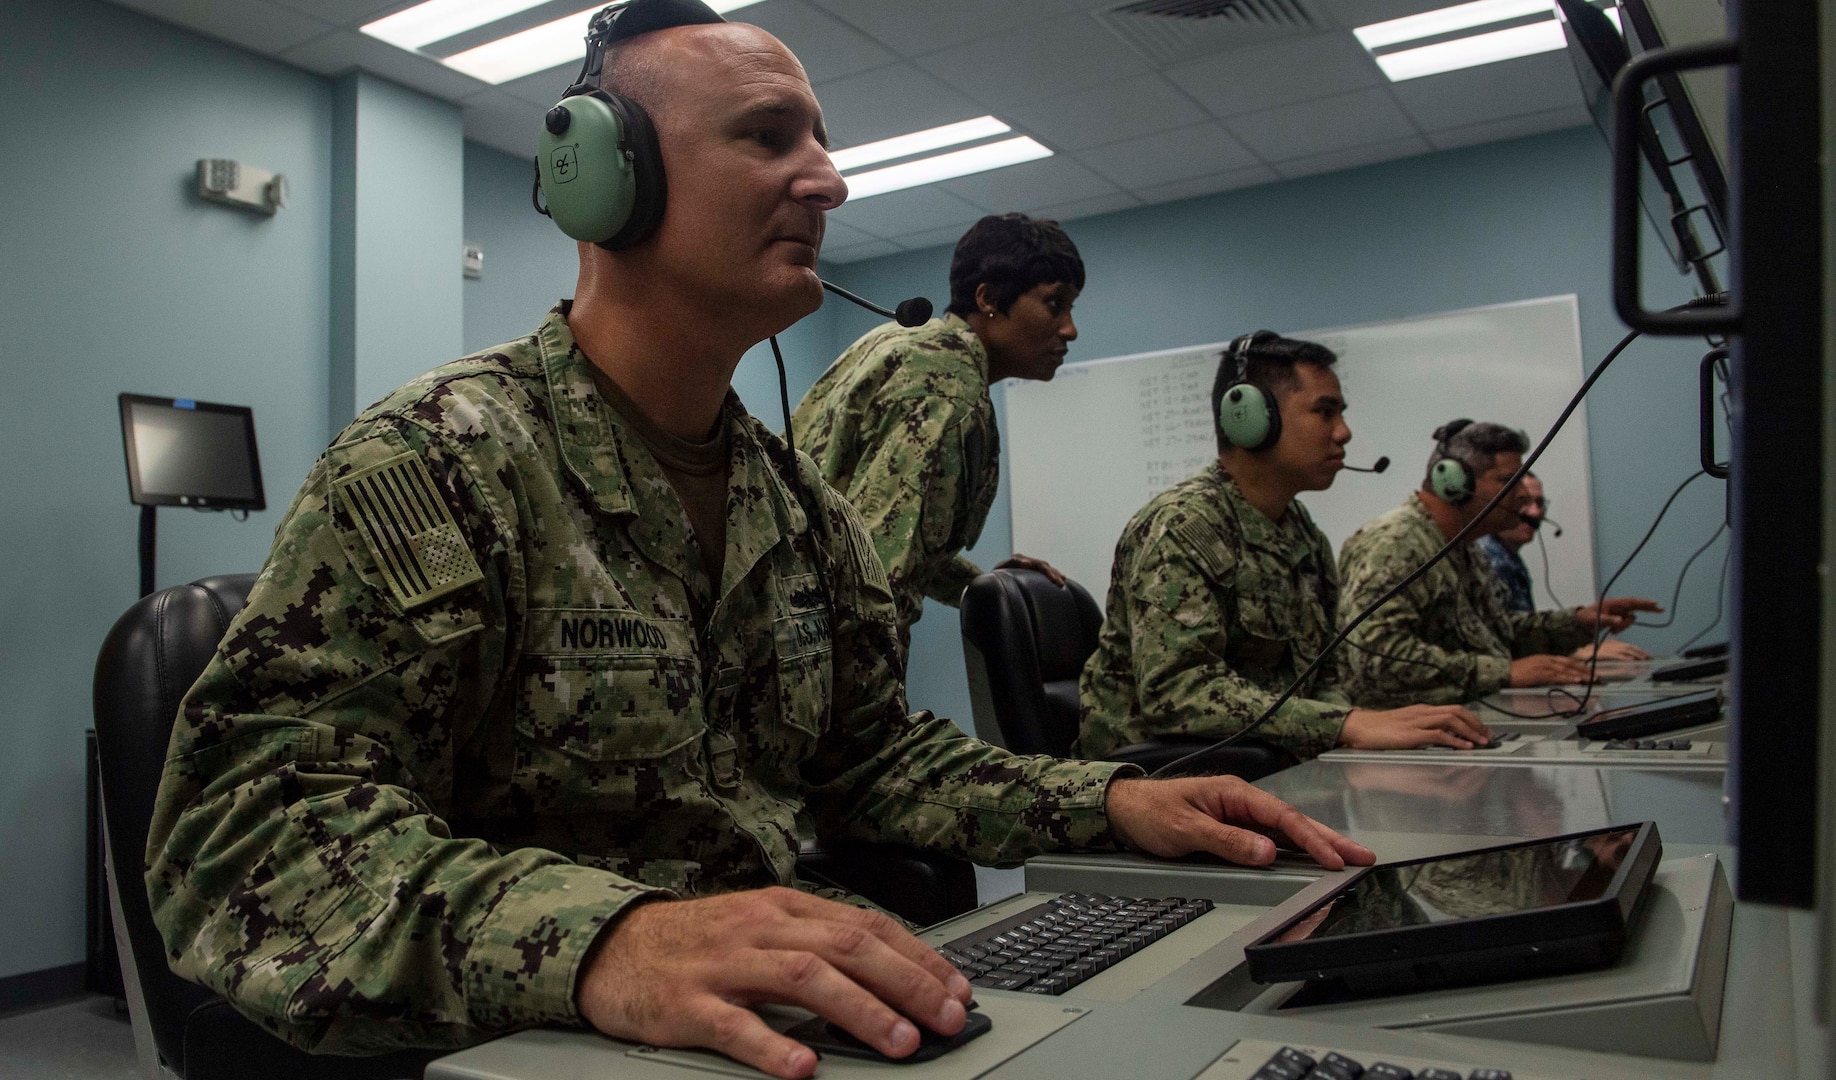 IMAGE: 190611-N-HV059-1005 NORFOLK (June 11, 2019) Sonar Technician 1st Class Christopher Norwood trains on a console in a simulated sonar room at the Center for Surface Combat Systems' (CSCS) Combined Integrated Air and Missile Defense (IAMD) / Anti-Submarine Warfare (ASW) Trainer (CIAT), onboard Naval Base Norfolk.  CSCS’ main mission is to develop and deliver surface ship combat systems training to the fleet and achieve surface warfare superiority. (U.S. Navy photo by Mass Communication Specialist 2nd Class Sonja Wickard/Released)